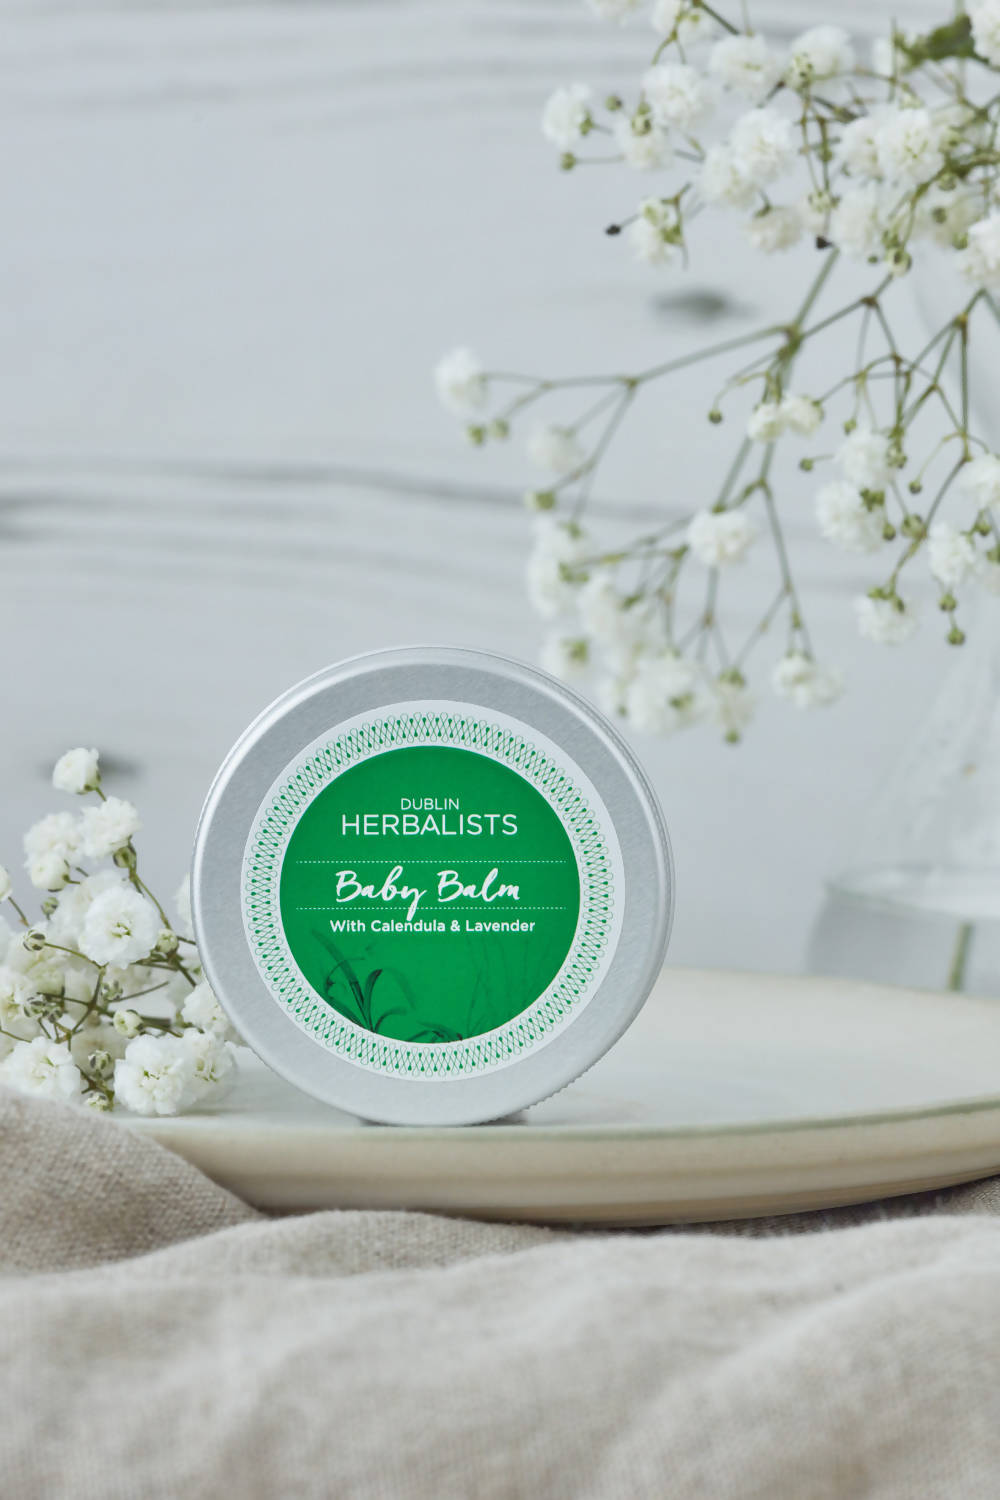 Baby Balm- With Calendula and Lavender